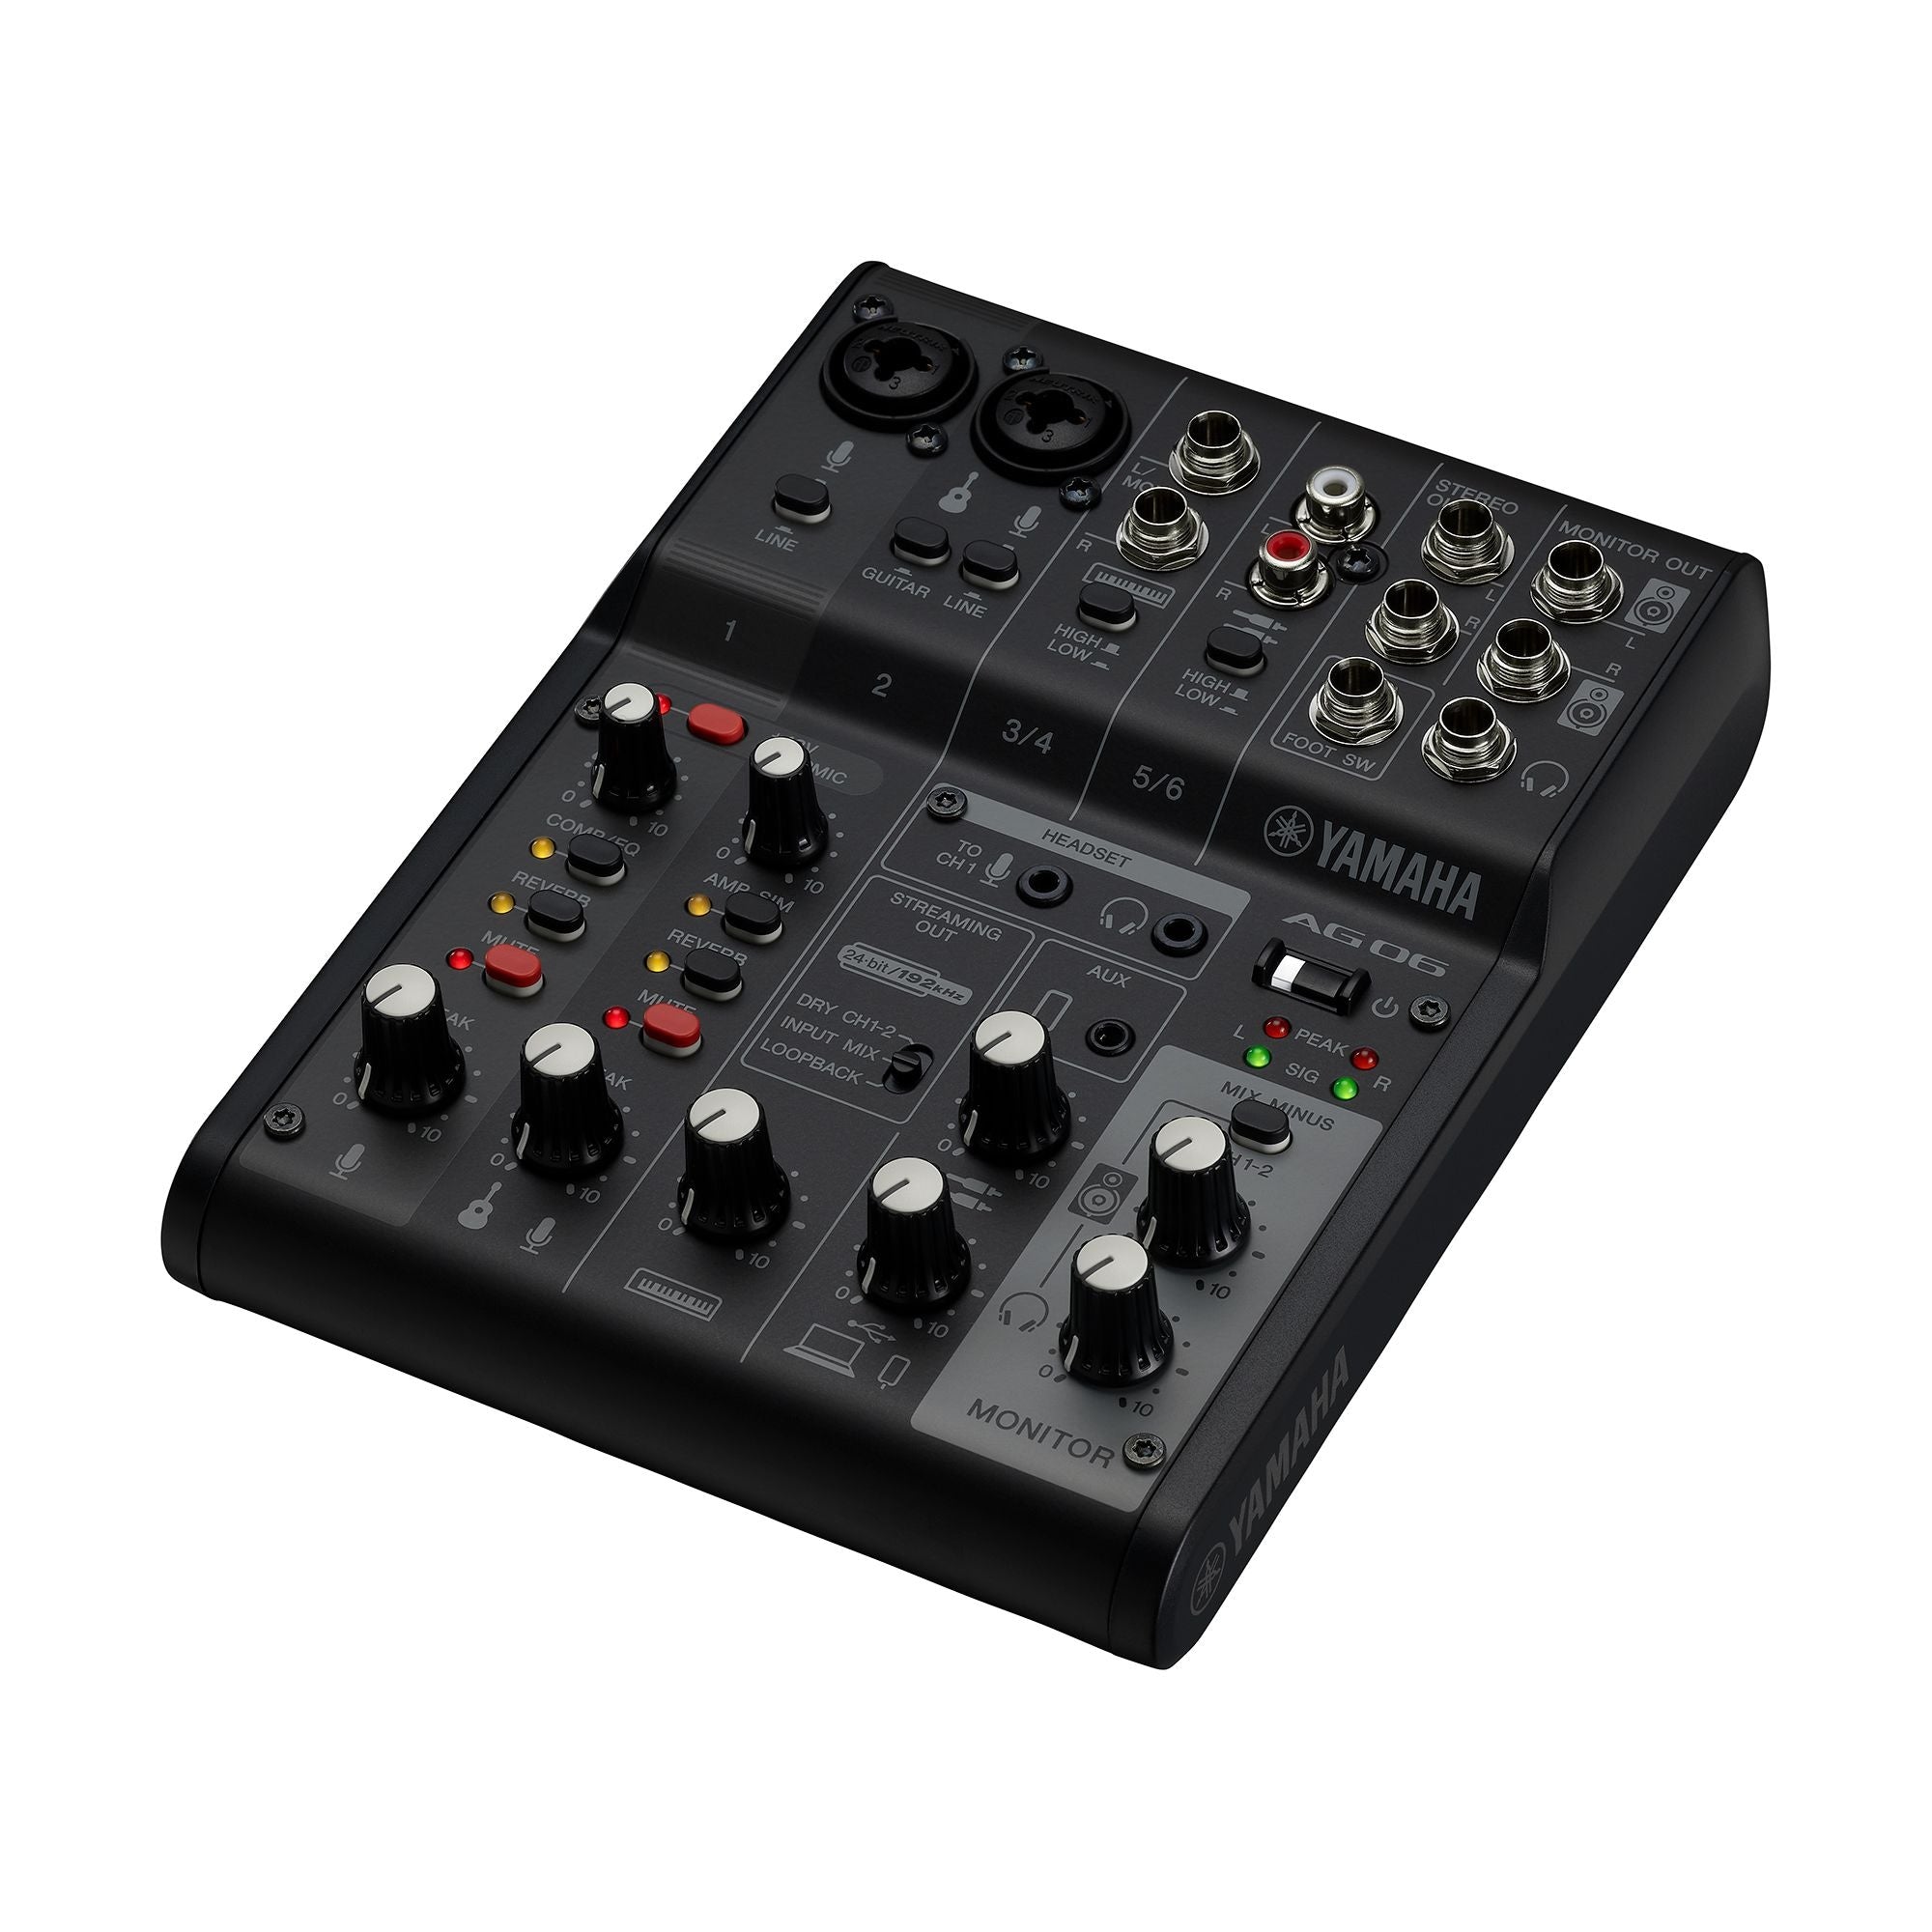 Yamaha Ag06 Mk2 6-Channel Mixer And Usb Audio Interface - Black